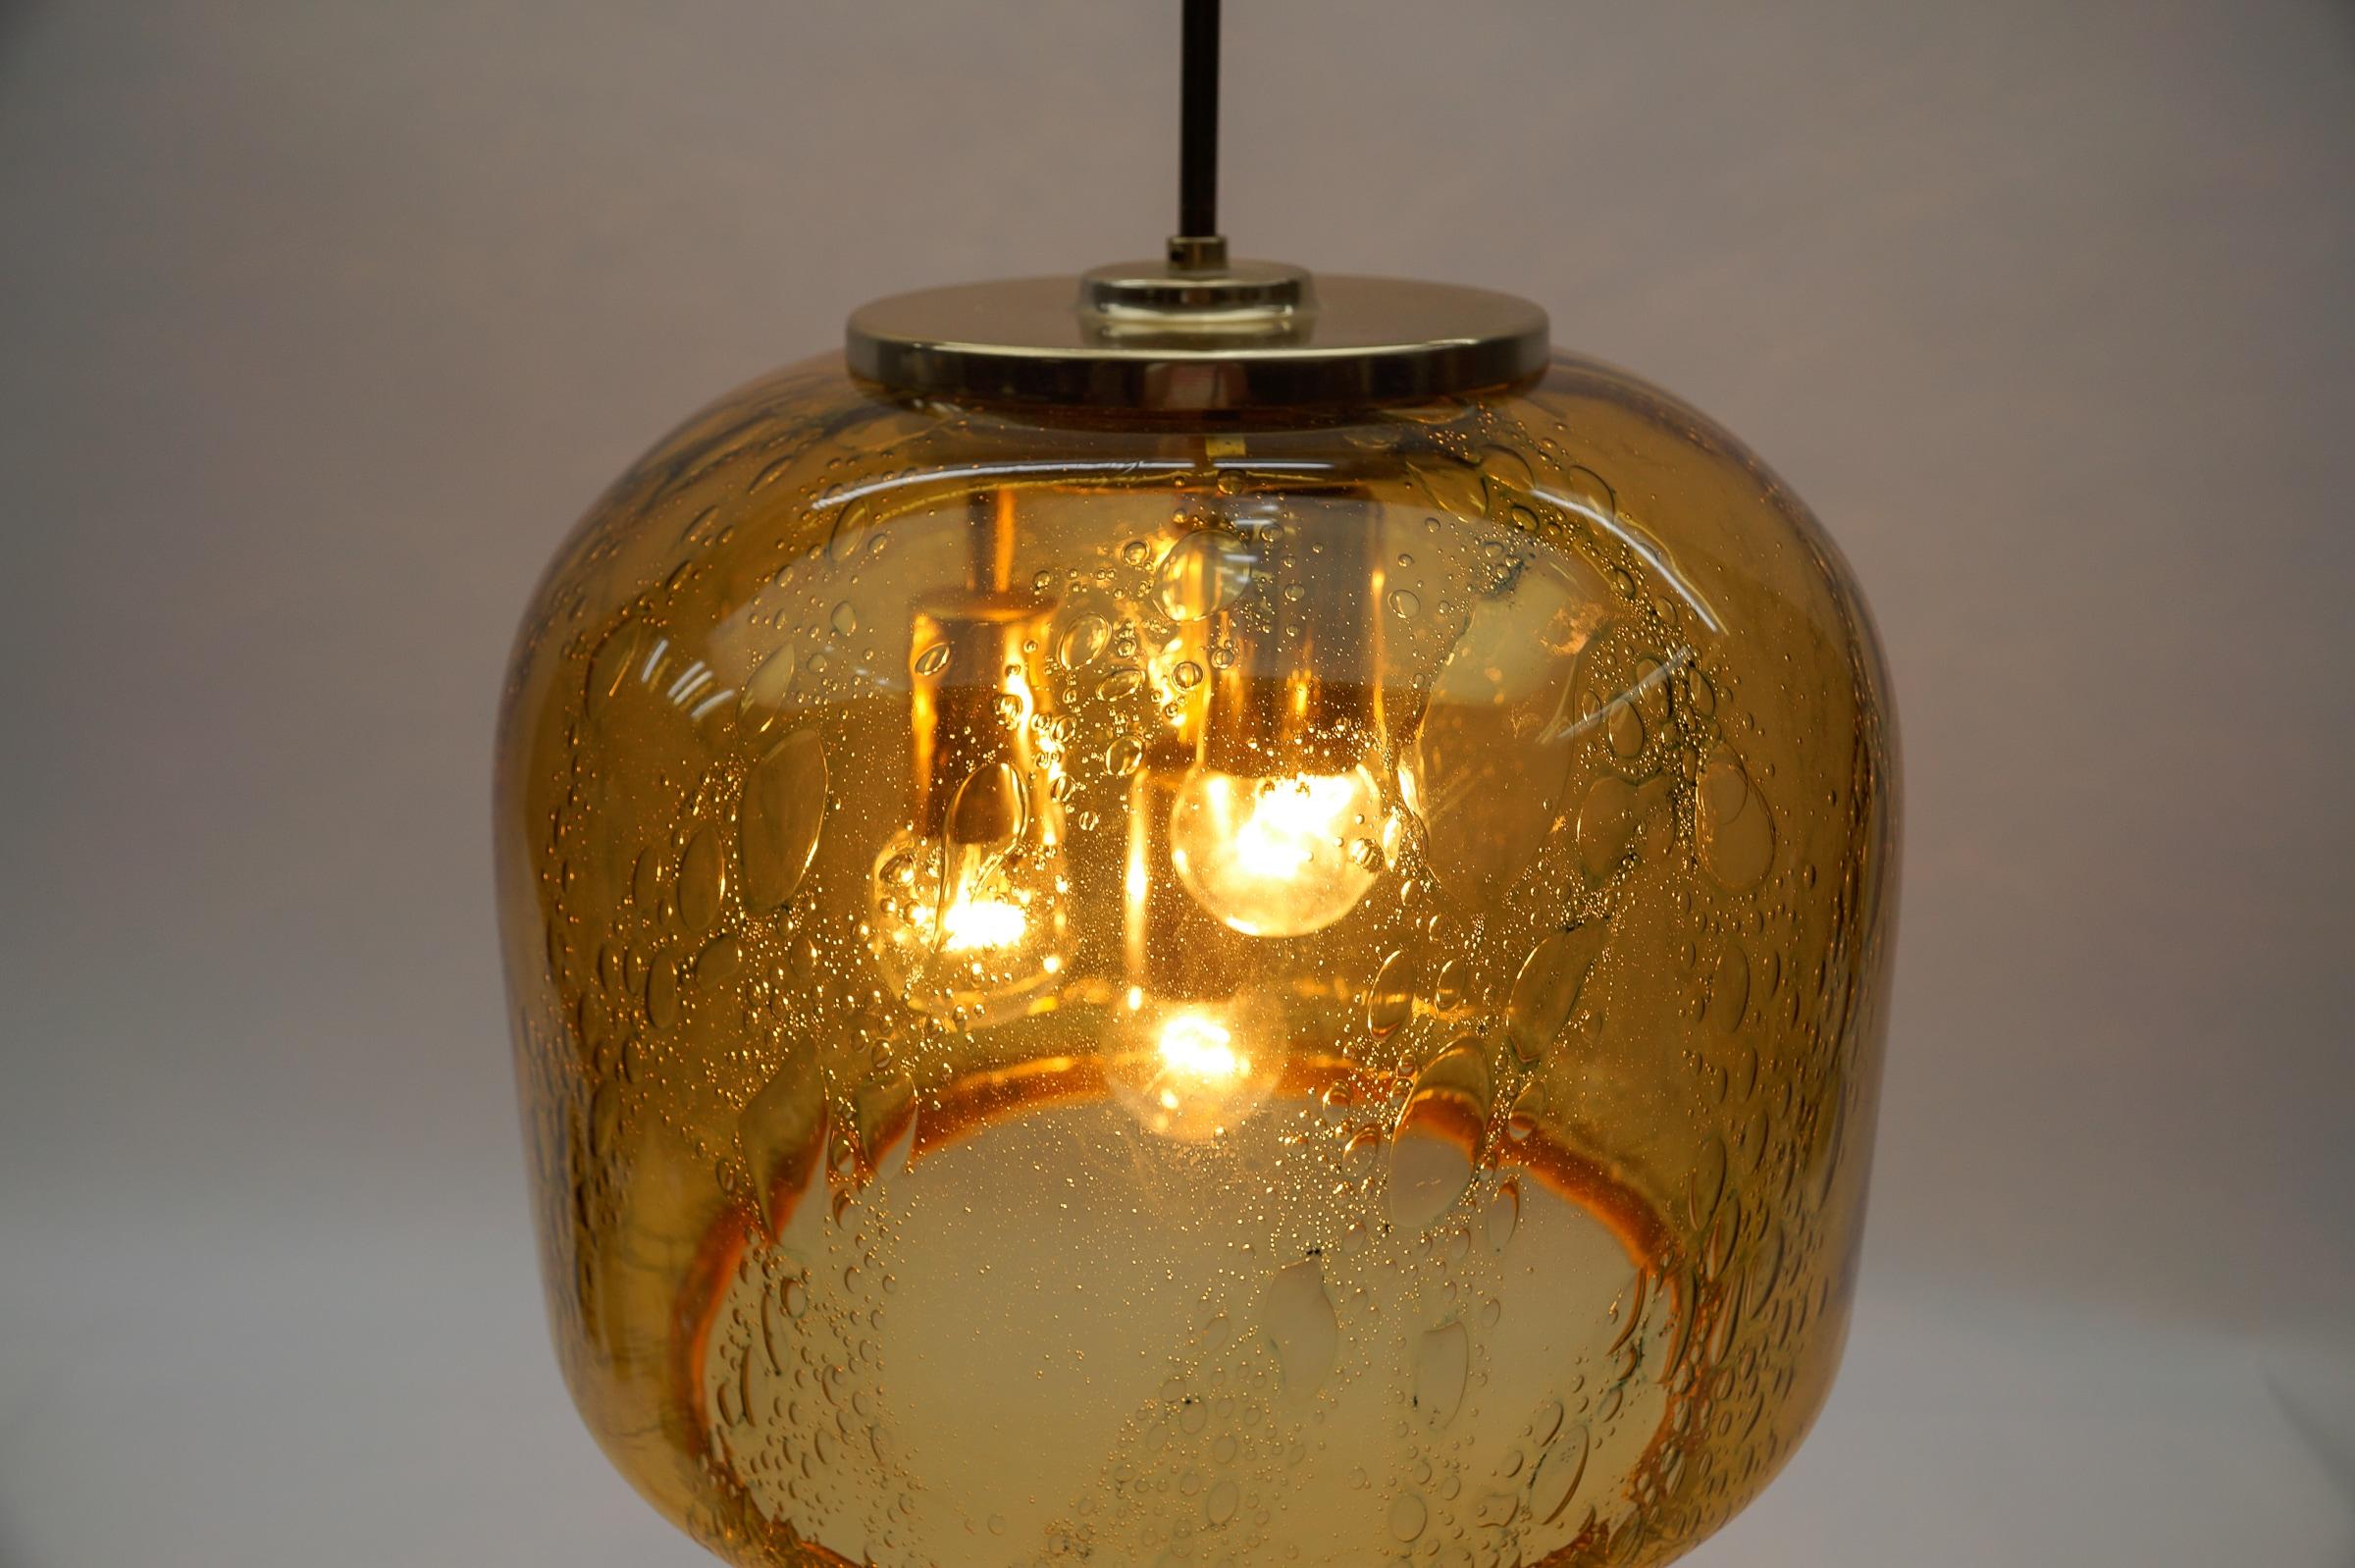 Huge Airbubble Glass Pendant Lamp by Doria, 1960s - Mid-Century Modern - Germany 5